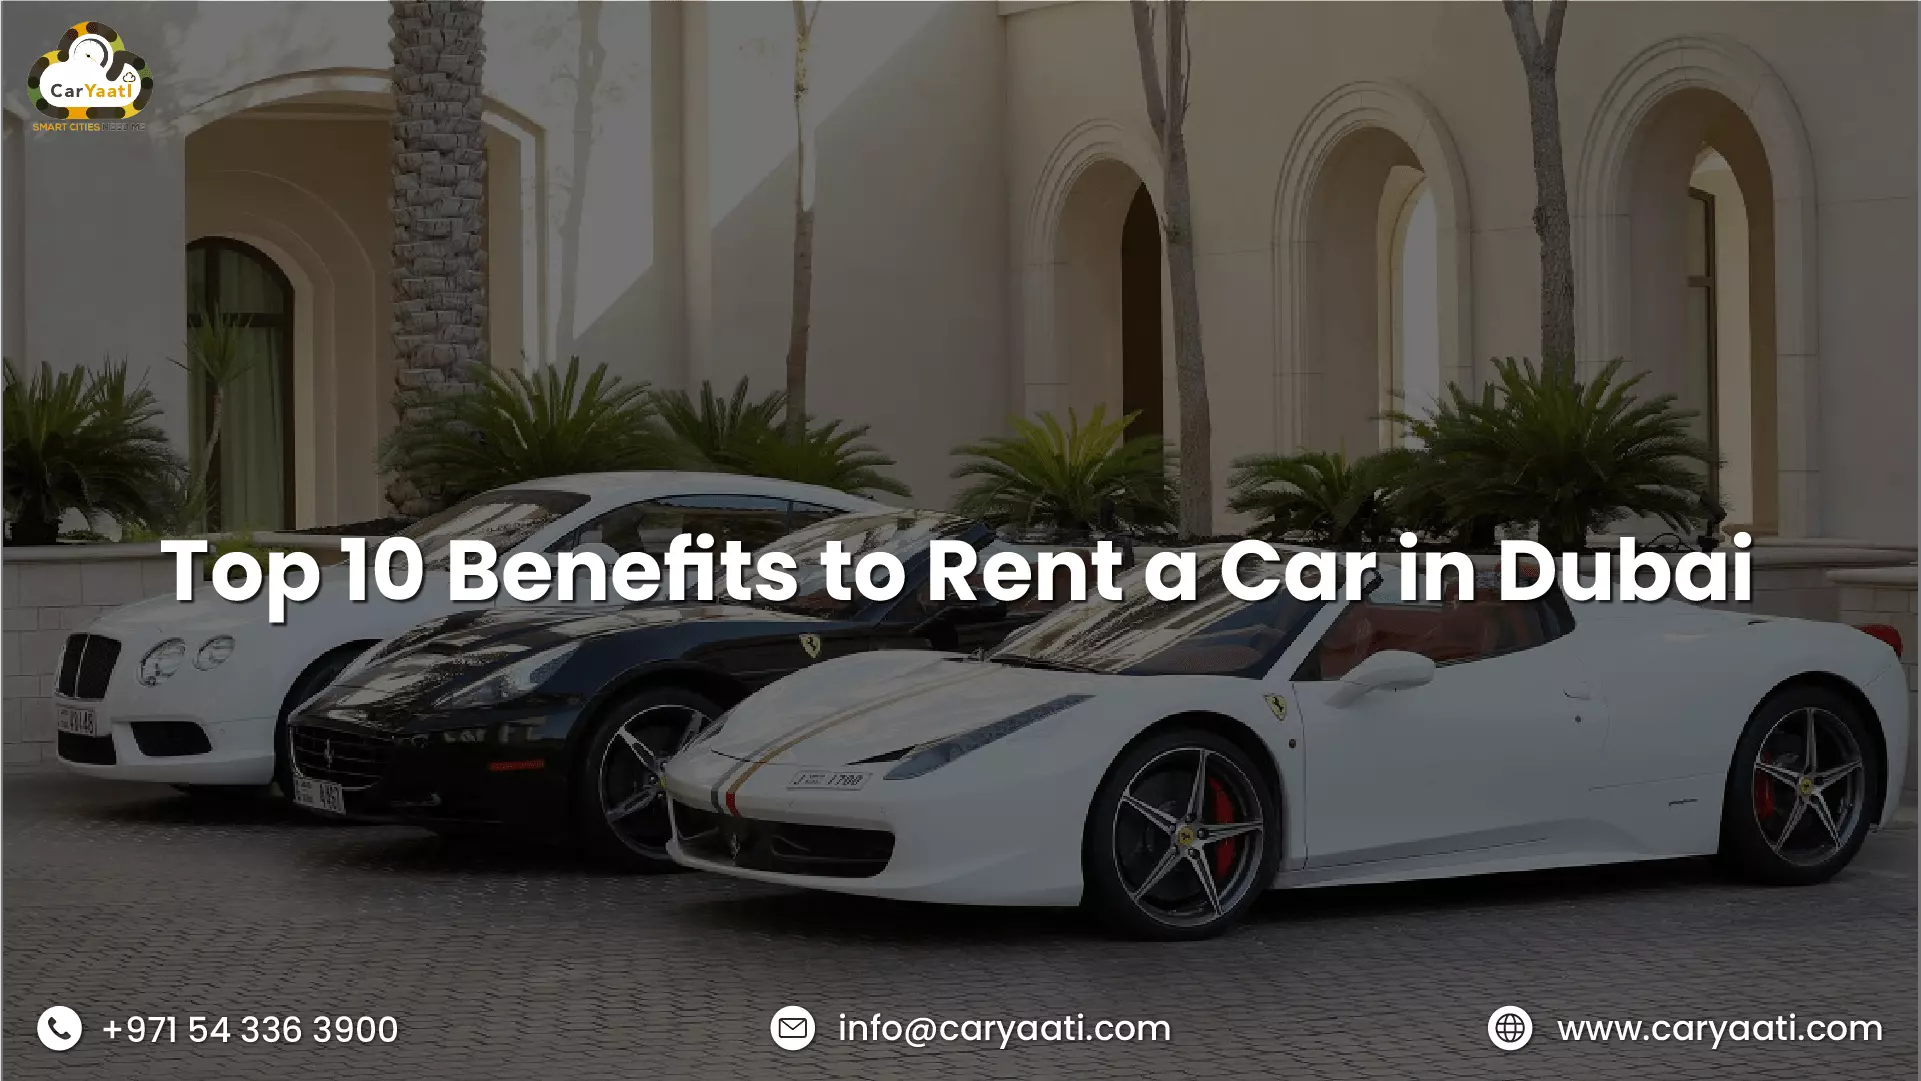 Top 10 Benefits to Rent a Car in Dubai